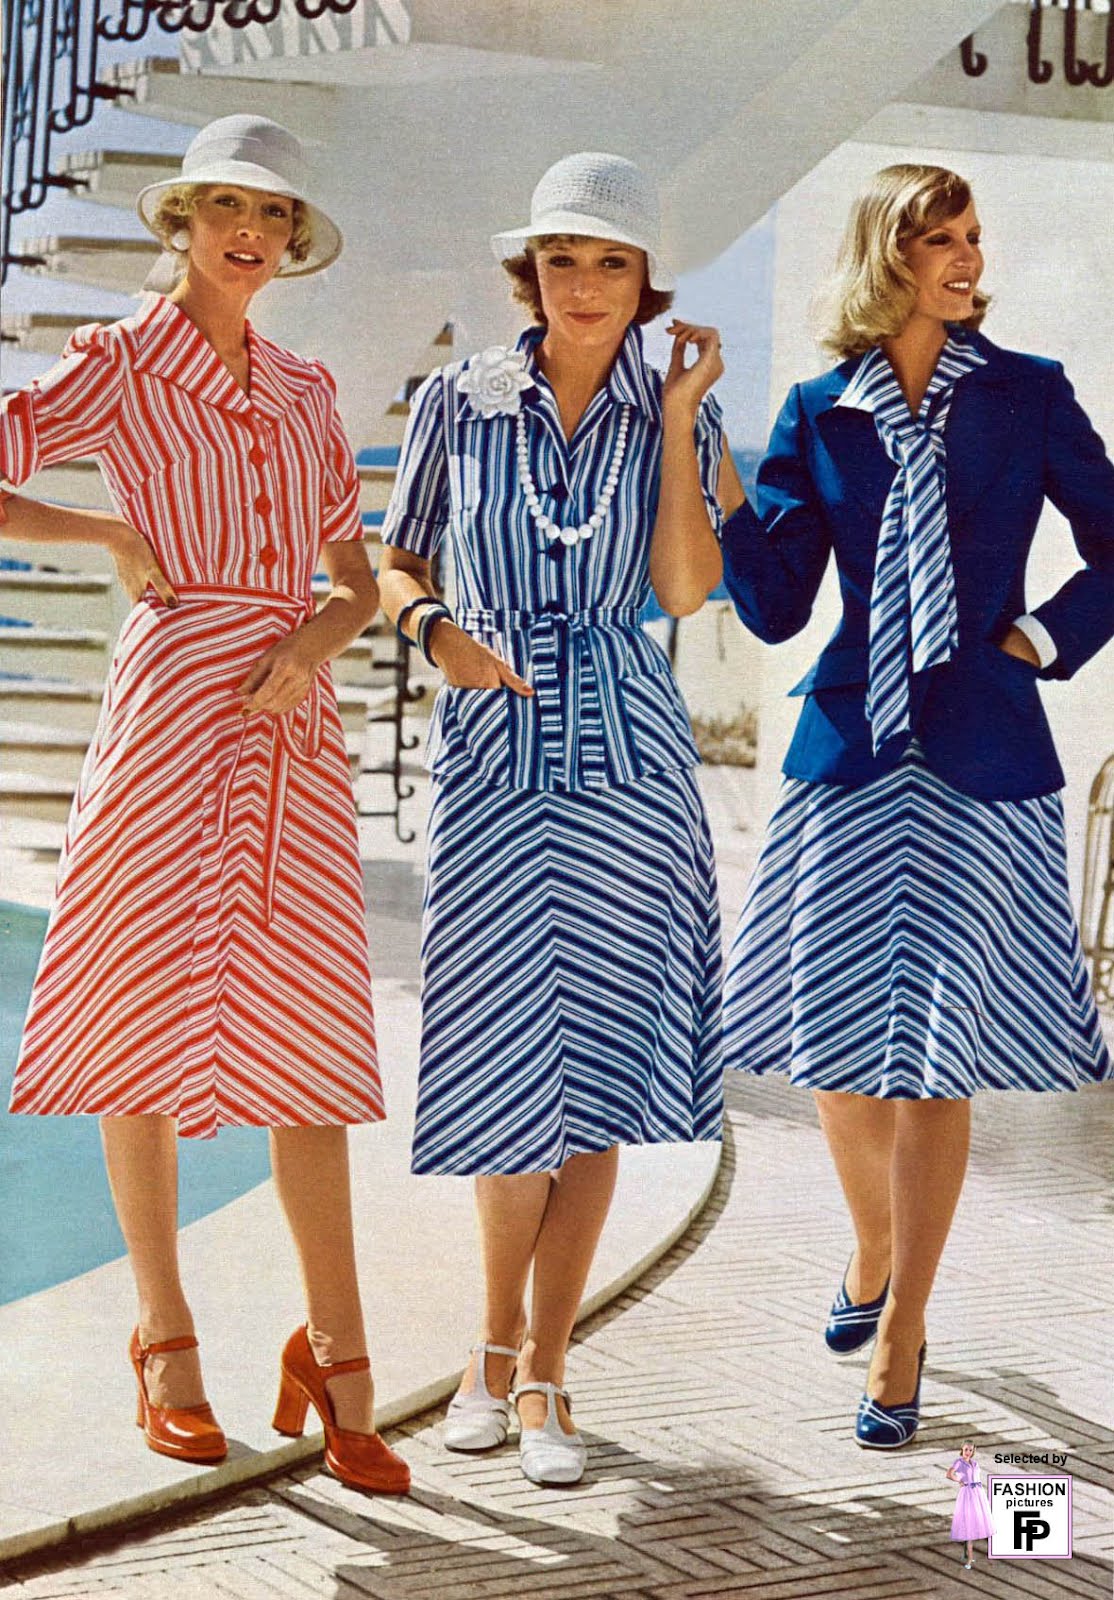 Adrienne and Co.: Fashionable Friday~ 1970's